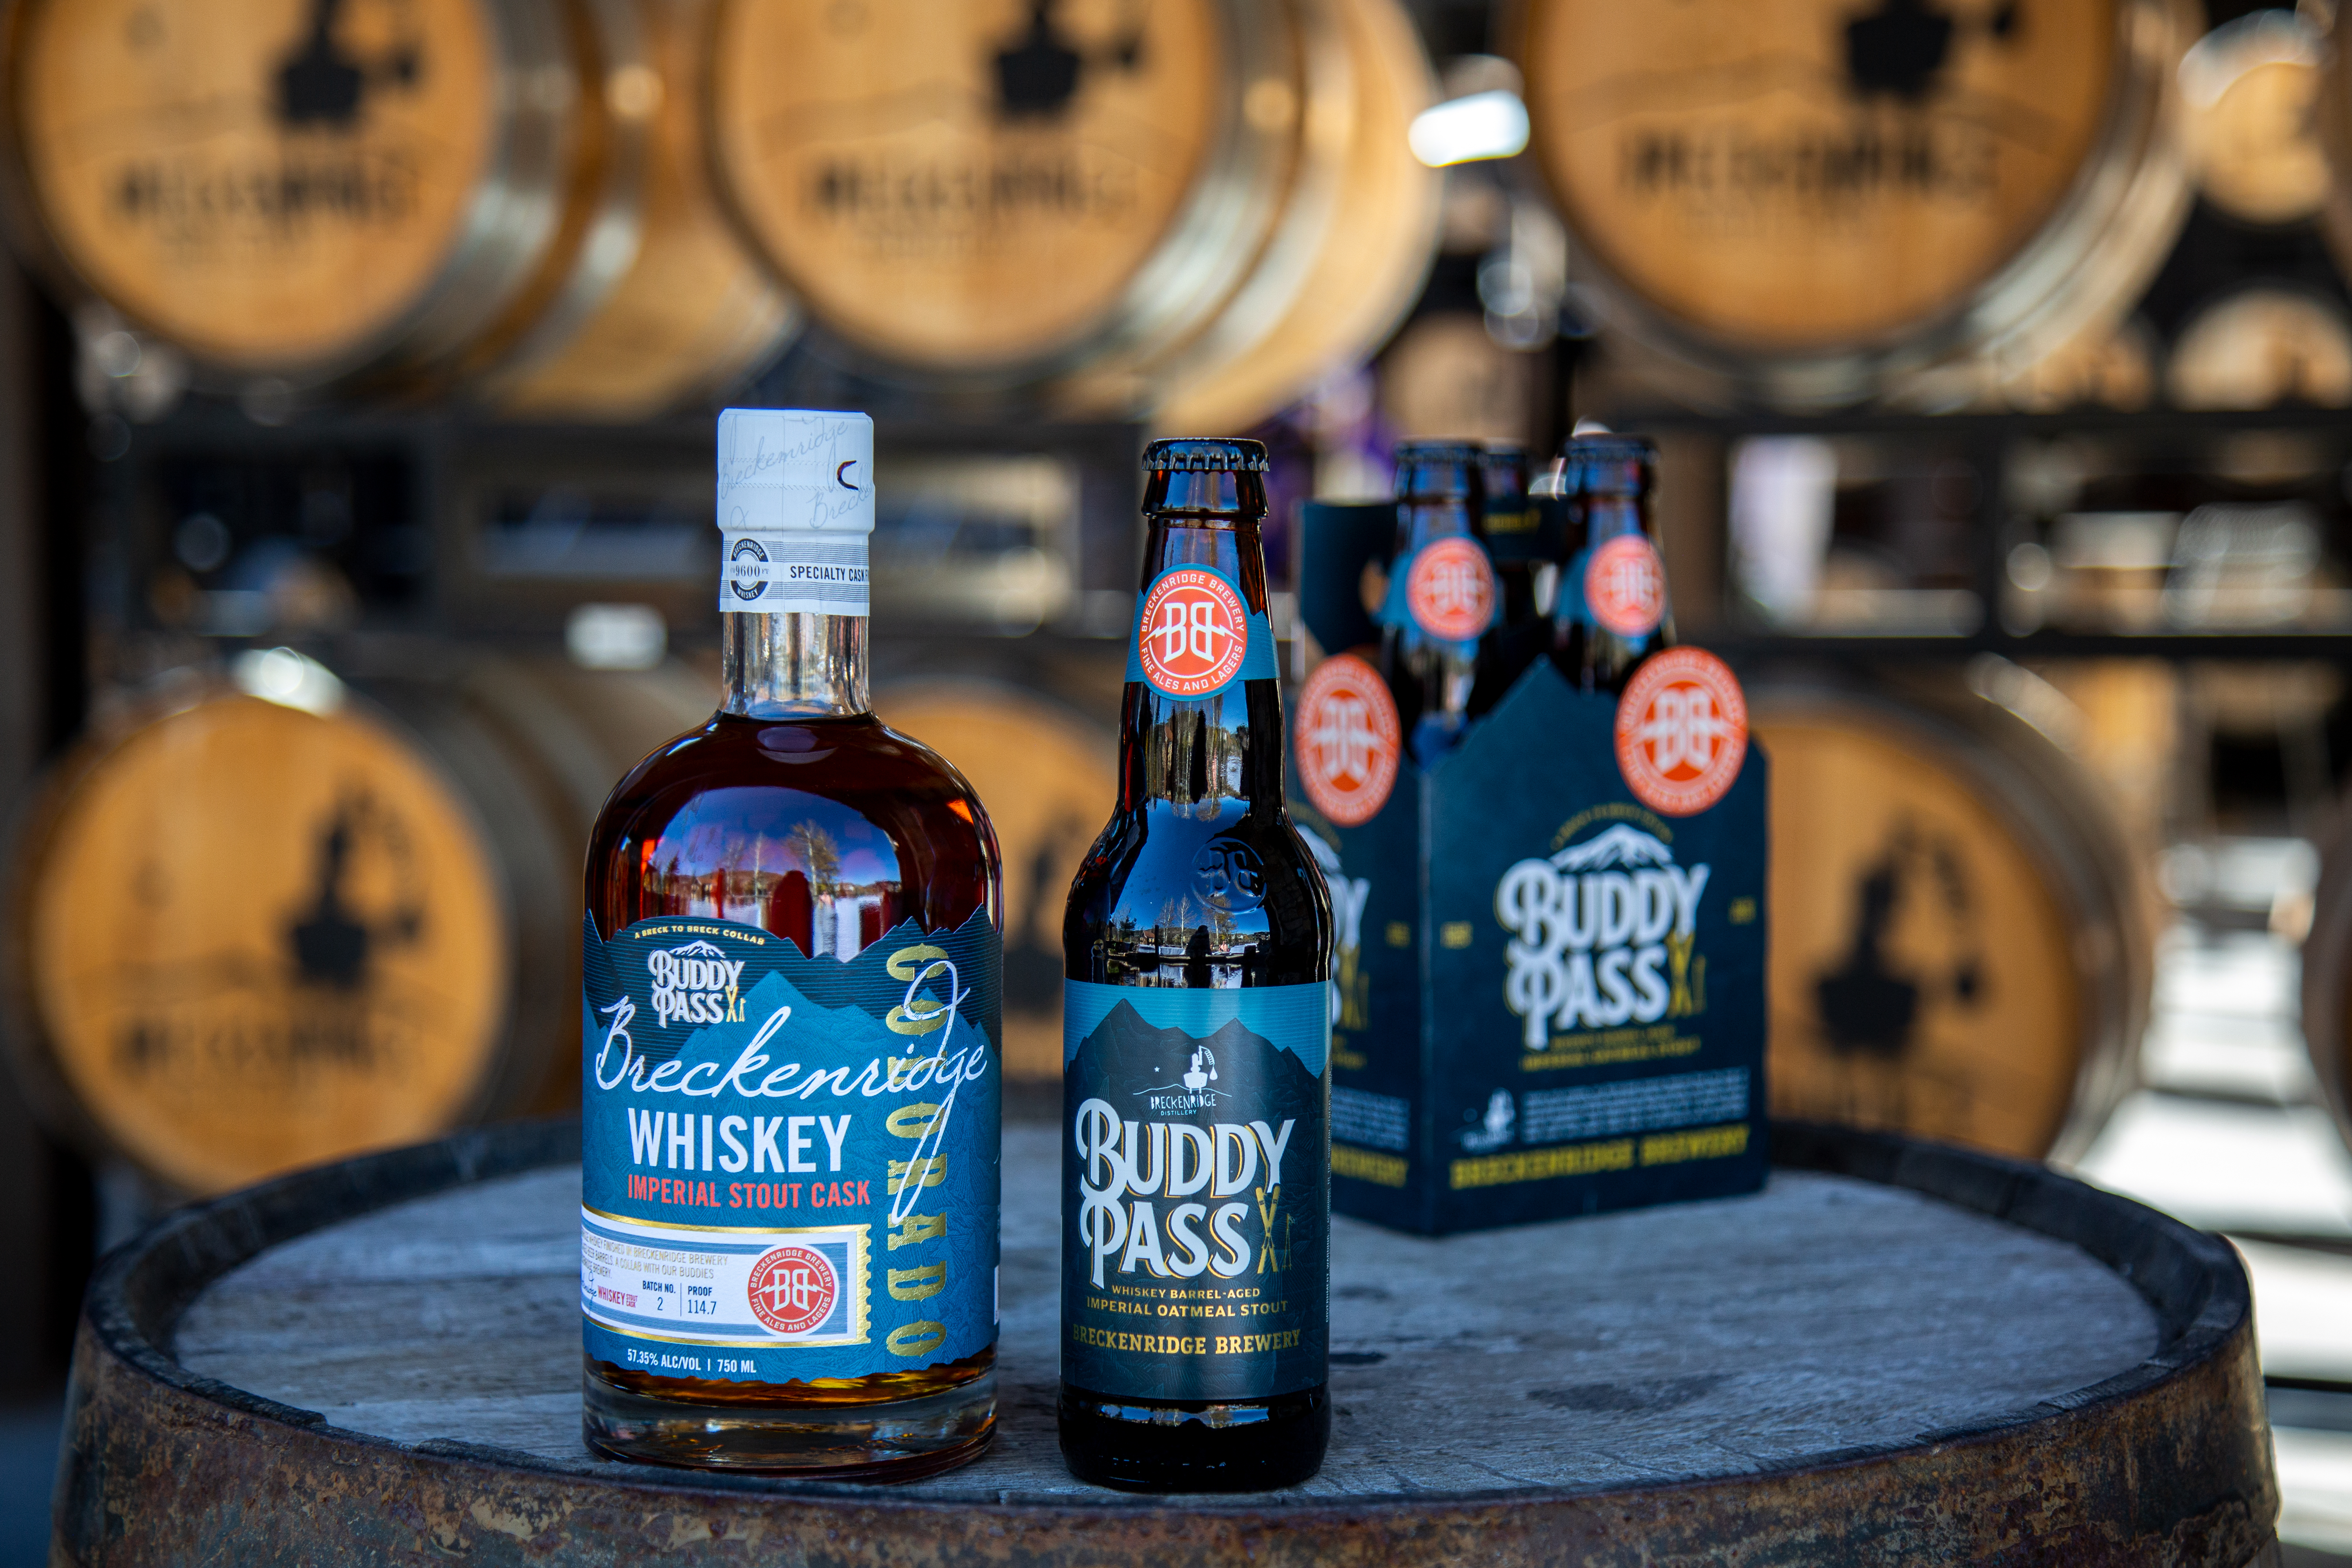 The Second Annual Buddy Pass, Limited-Edition Whiskey and Beer